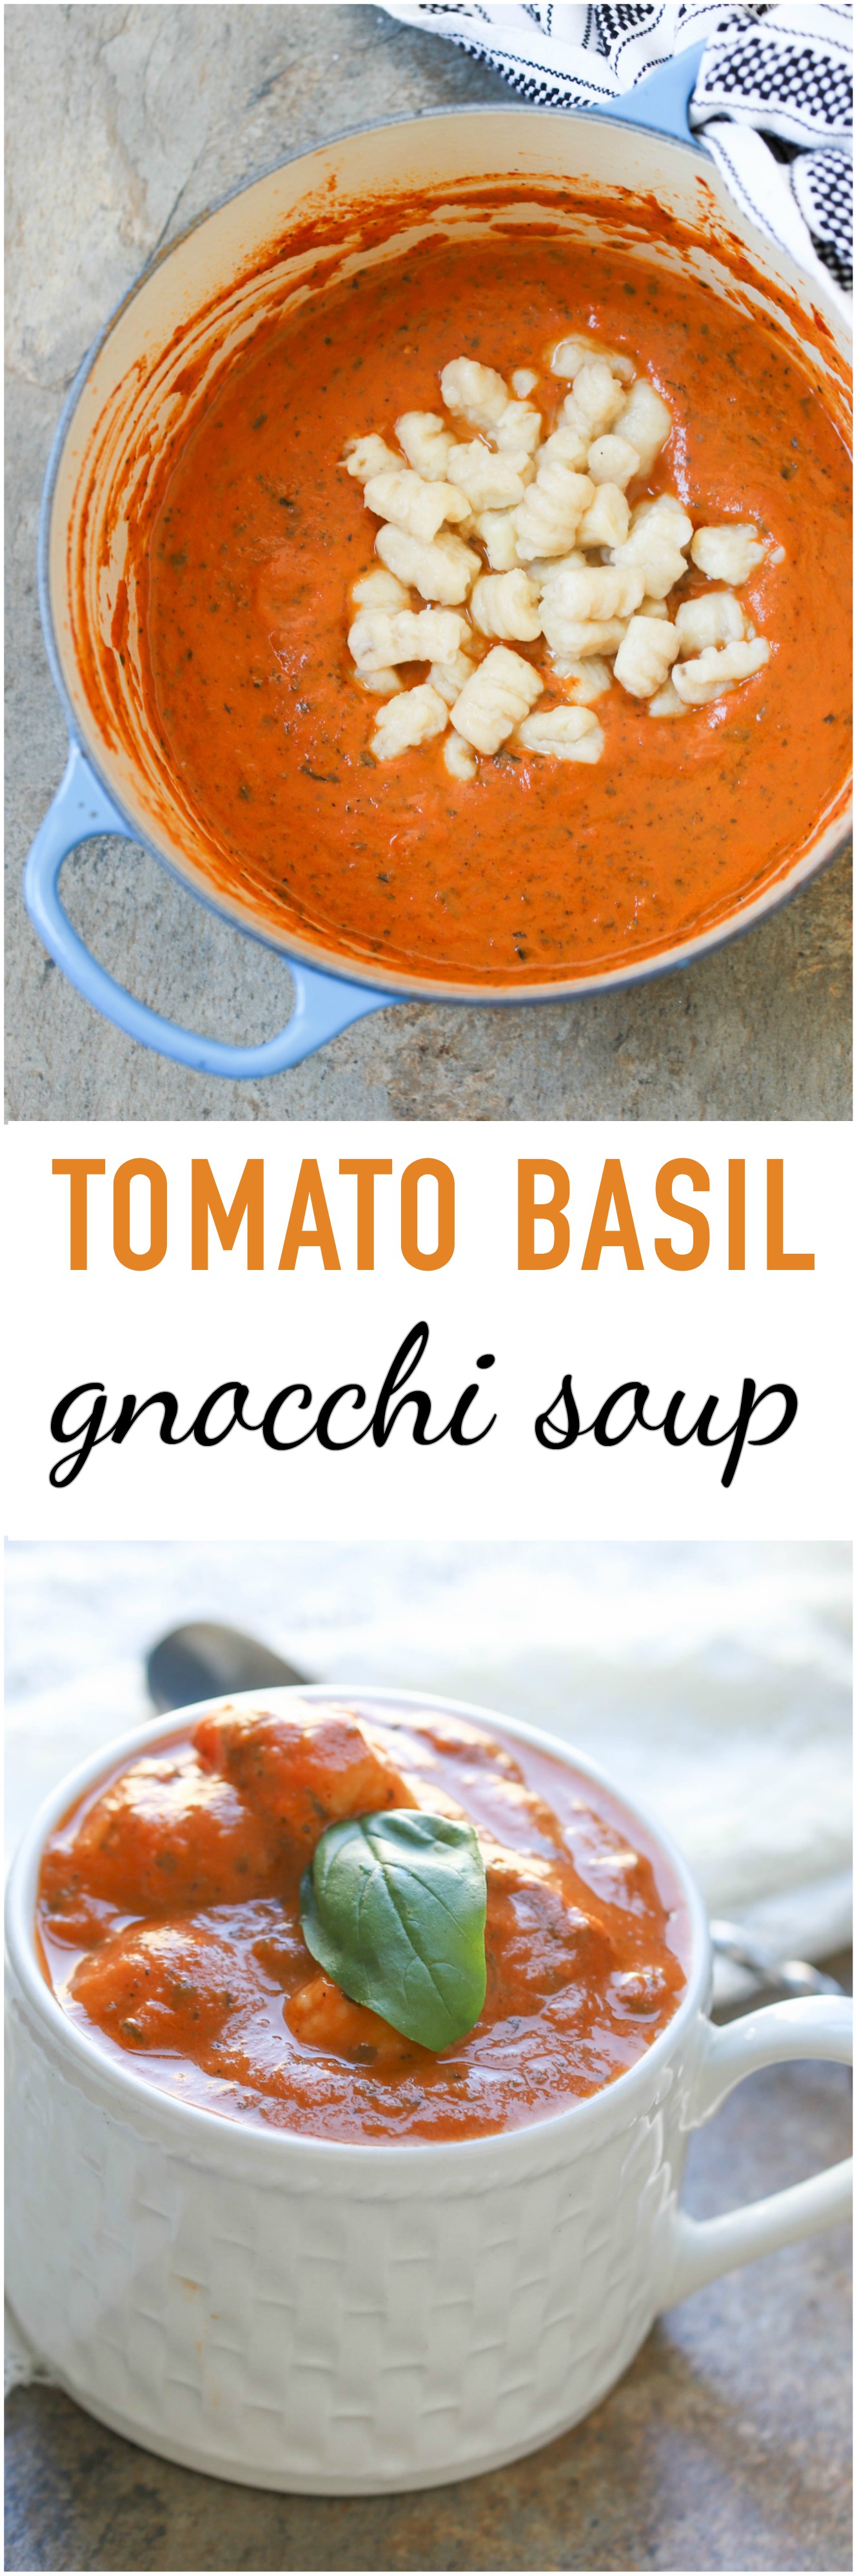 Tomato Basil Gnocchi Soup is an ultimate comfort food that combines creamy tomato soup with pillow-soft gnocchi. It is a vegetarian and vegan-friendly meal for both adults & kids. 